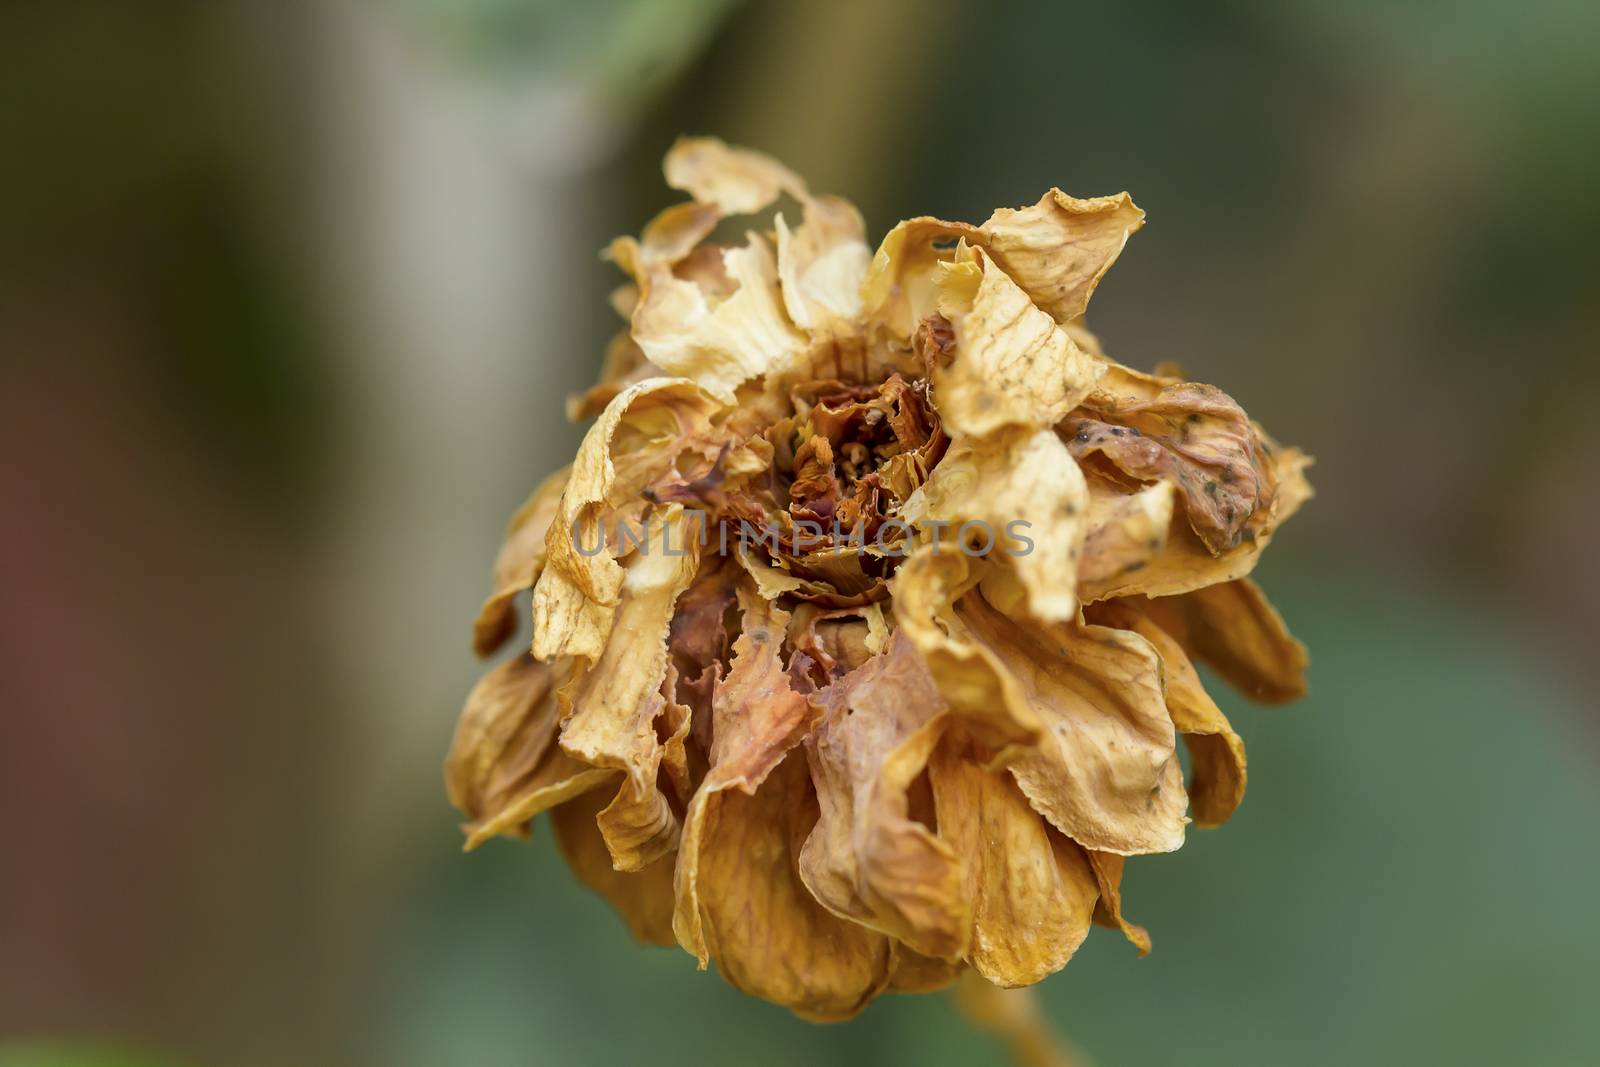 Closeup of withered and dried jasmine flower